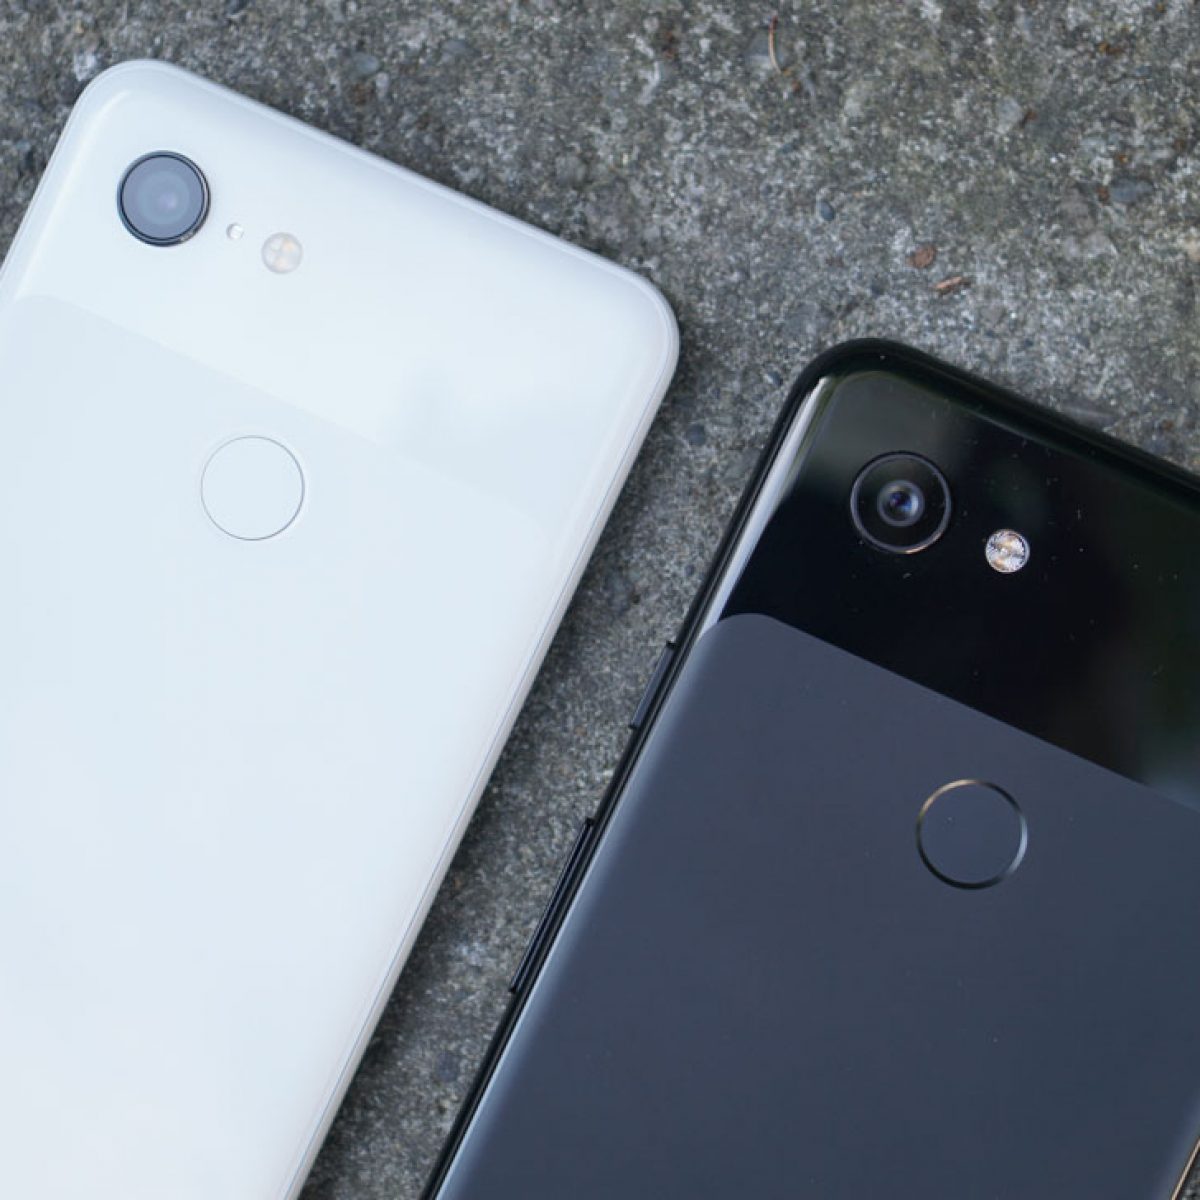 where can i buy an unlocked pixel 3